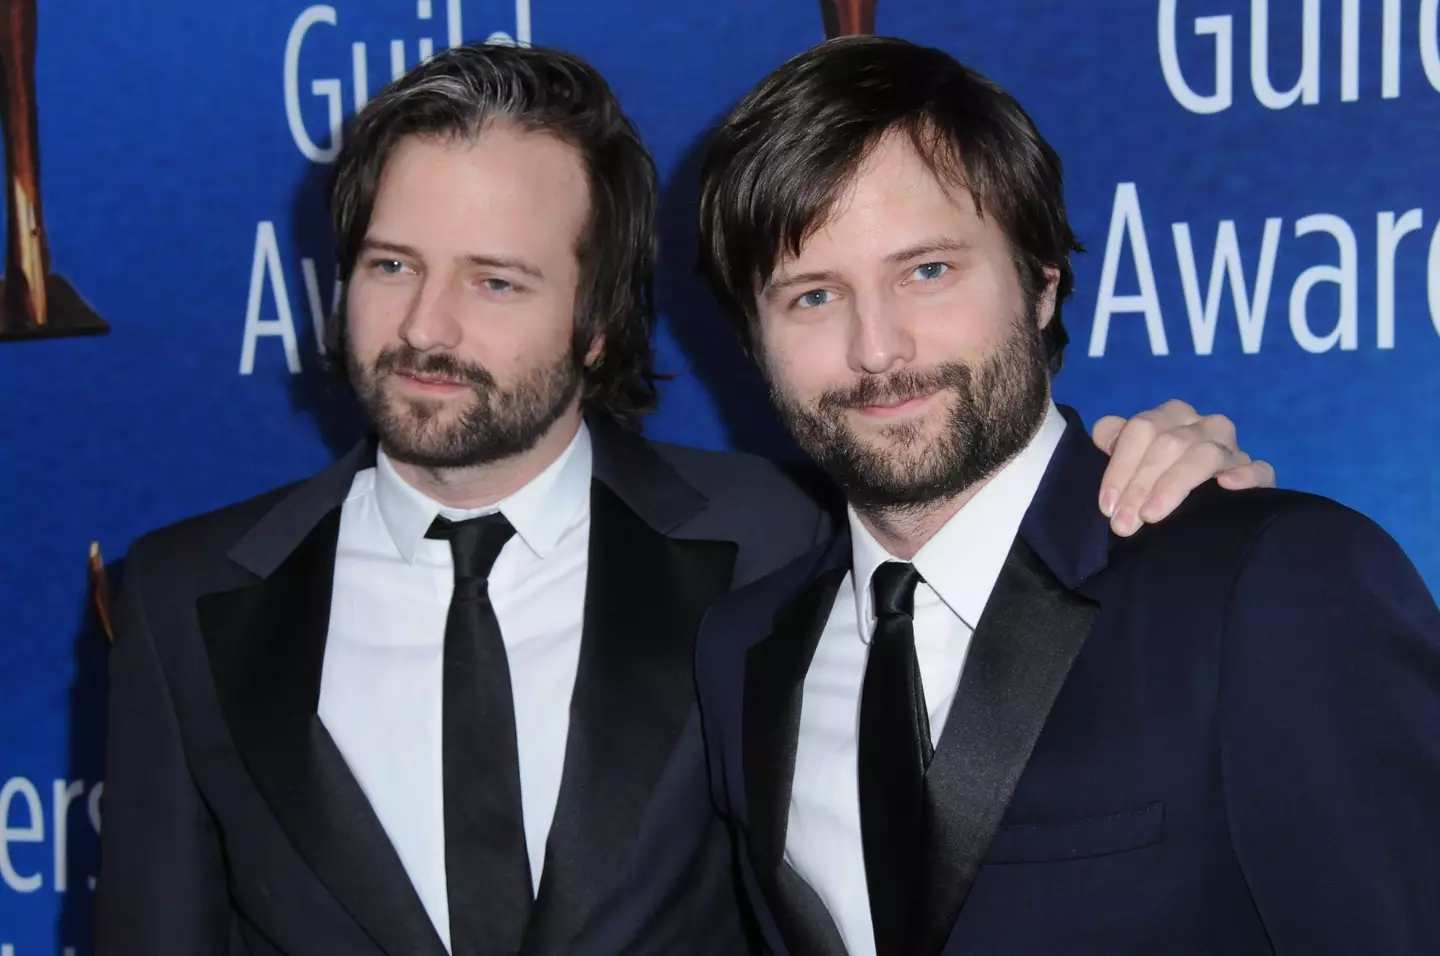 The Duffer Brothers have said season five will be shorter.